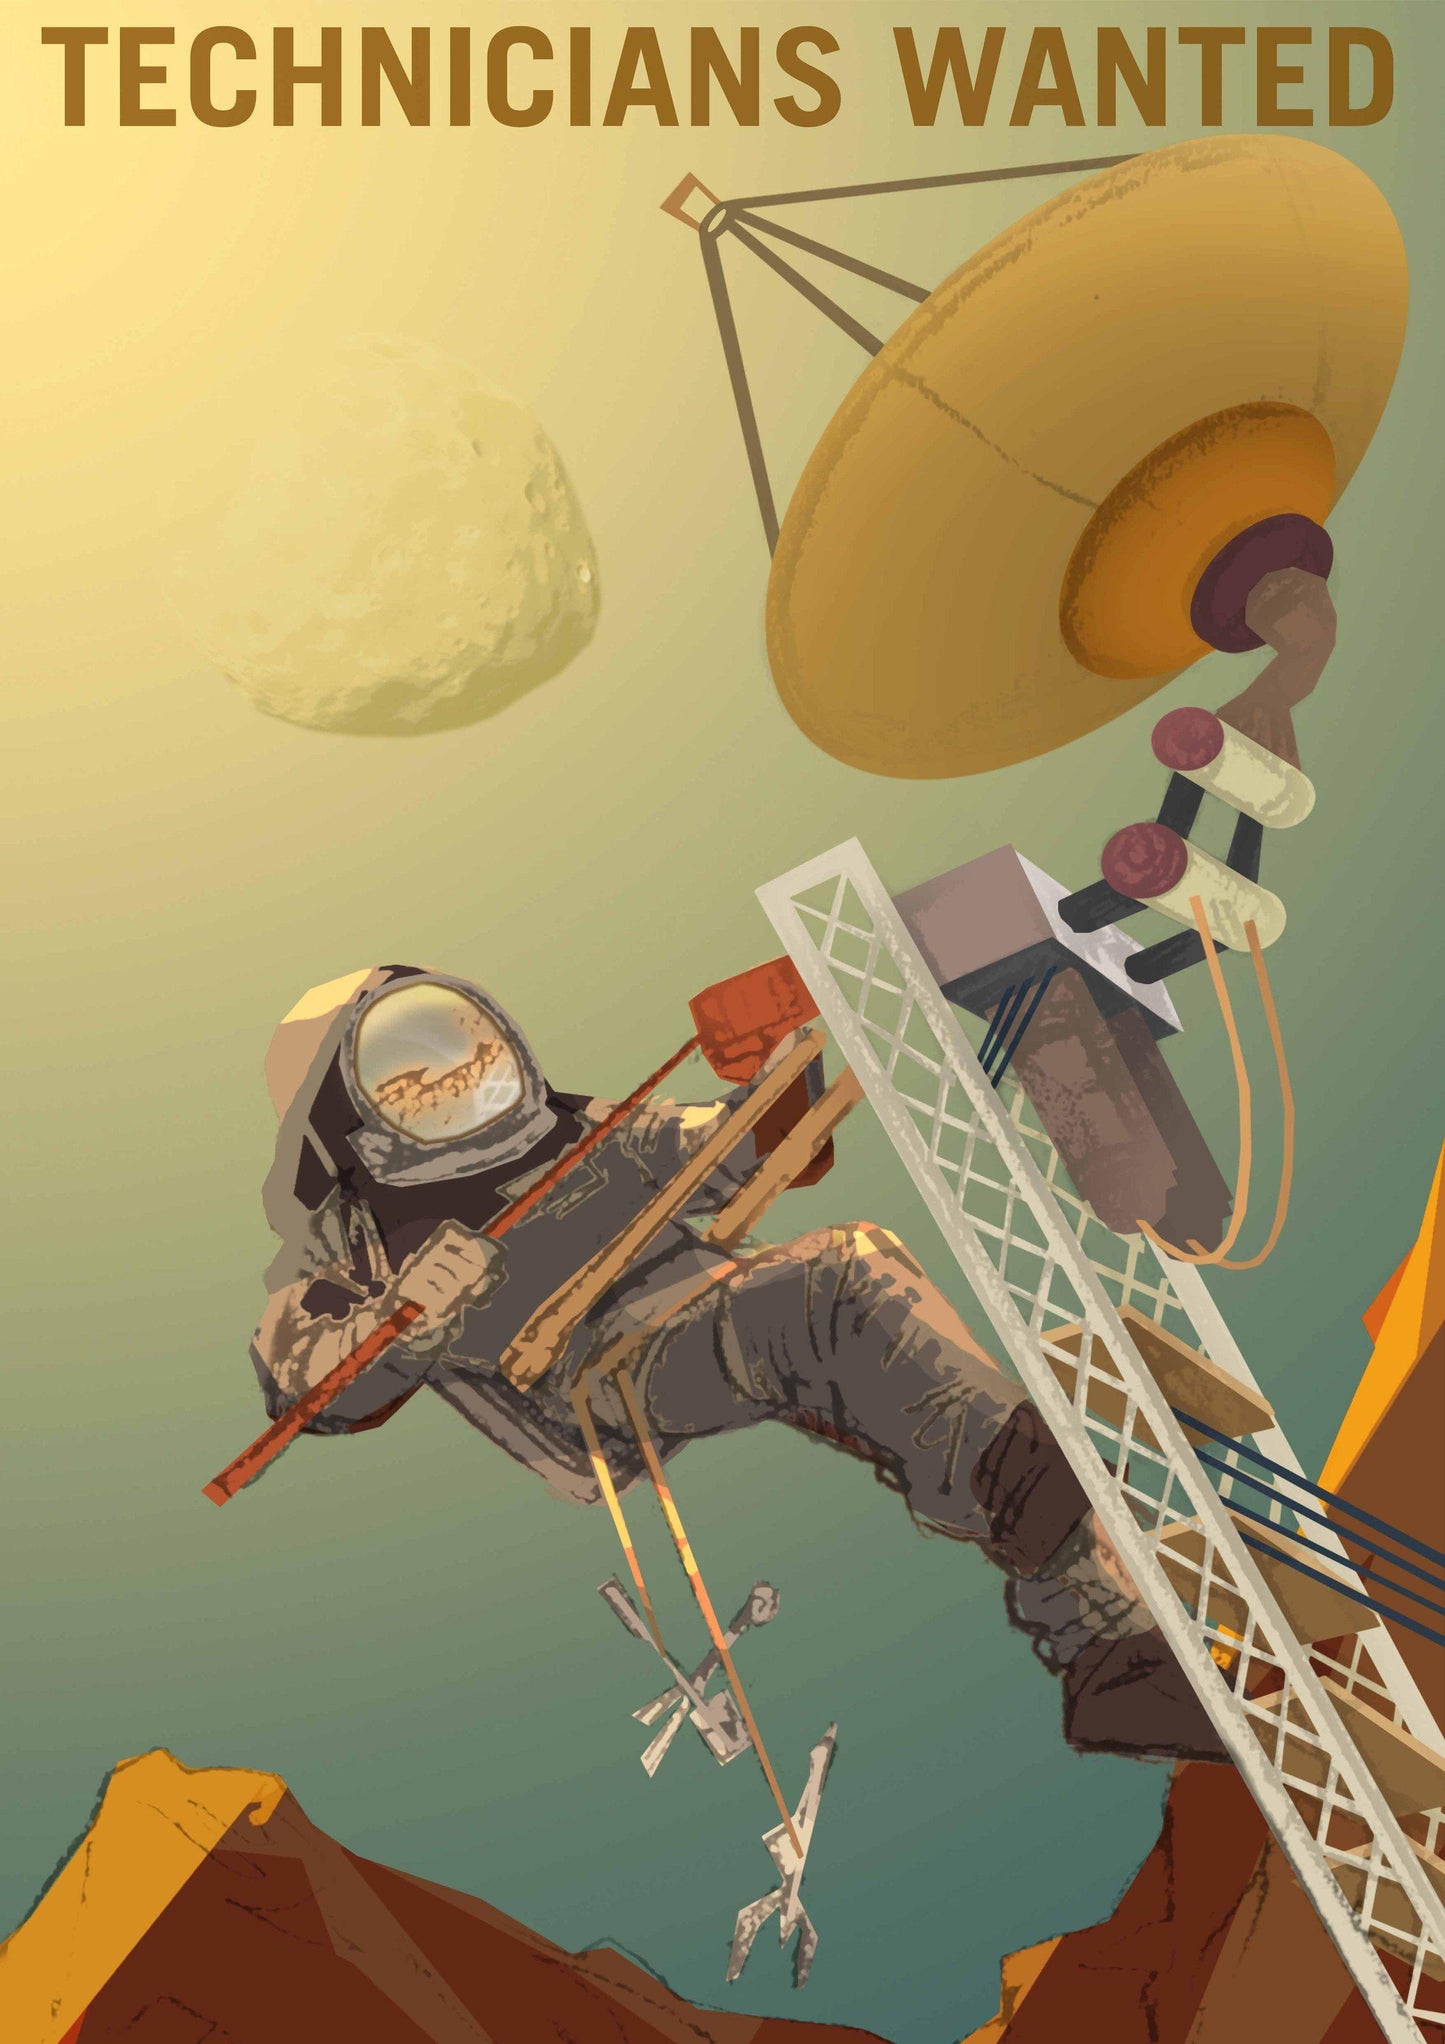 TECHNICIANS WANTED: NASA Space Art Poster - Pimlico Prints